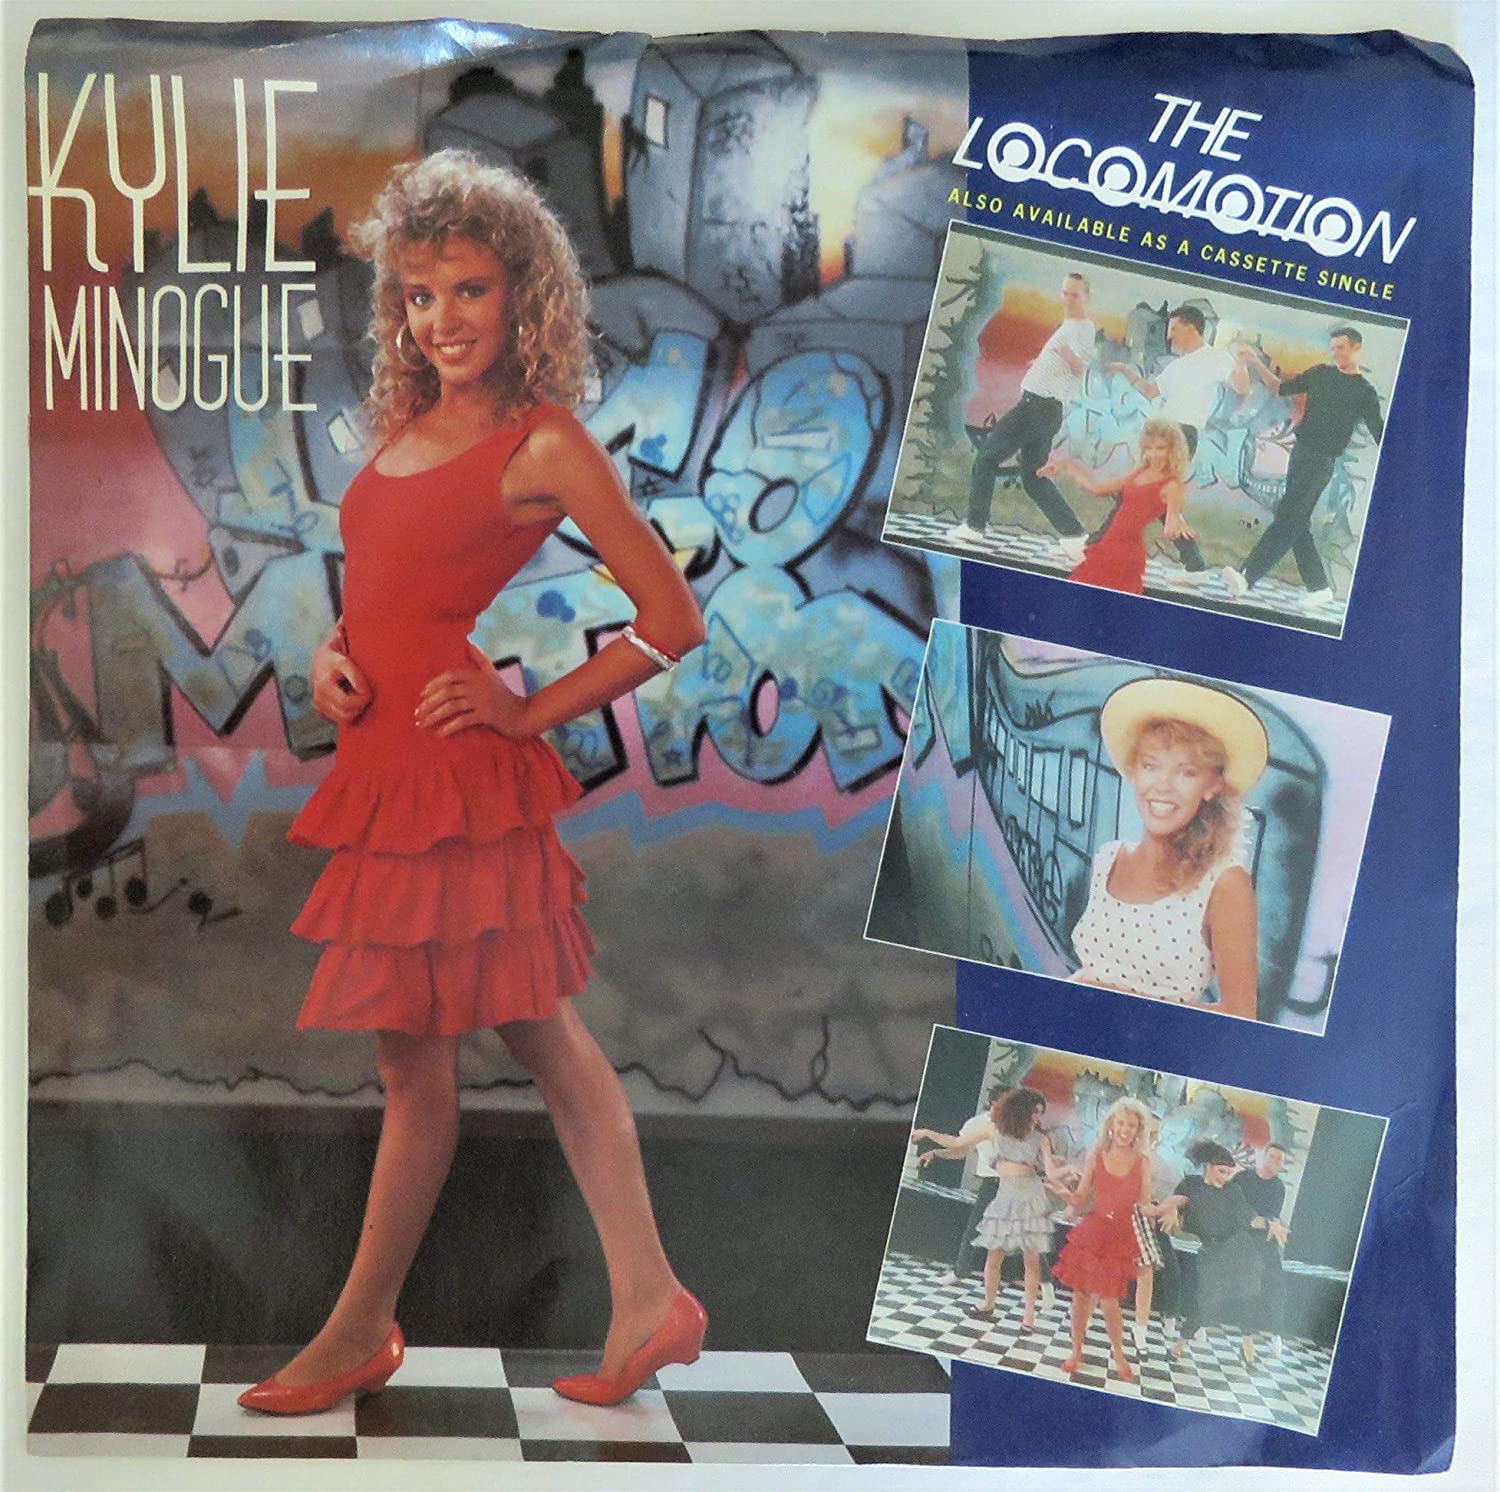 45rpm record sleeve with Kylie Minogue singing Locomotion.